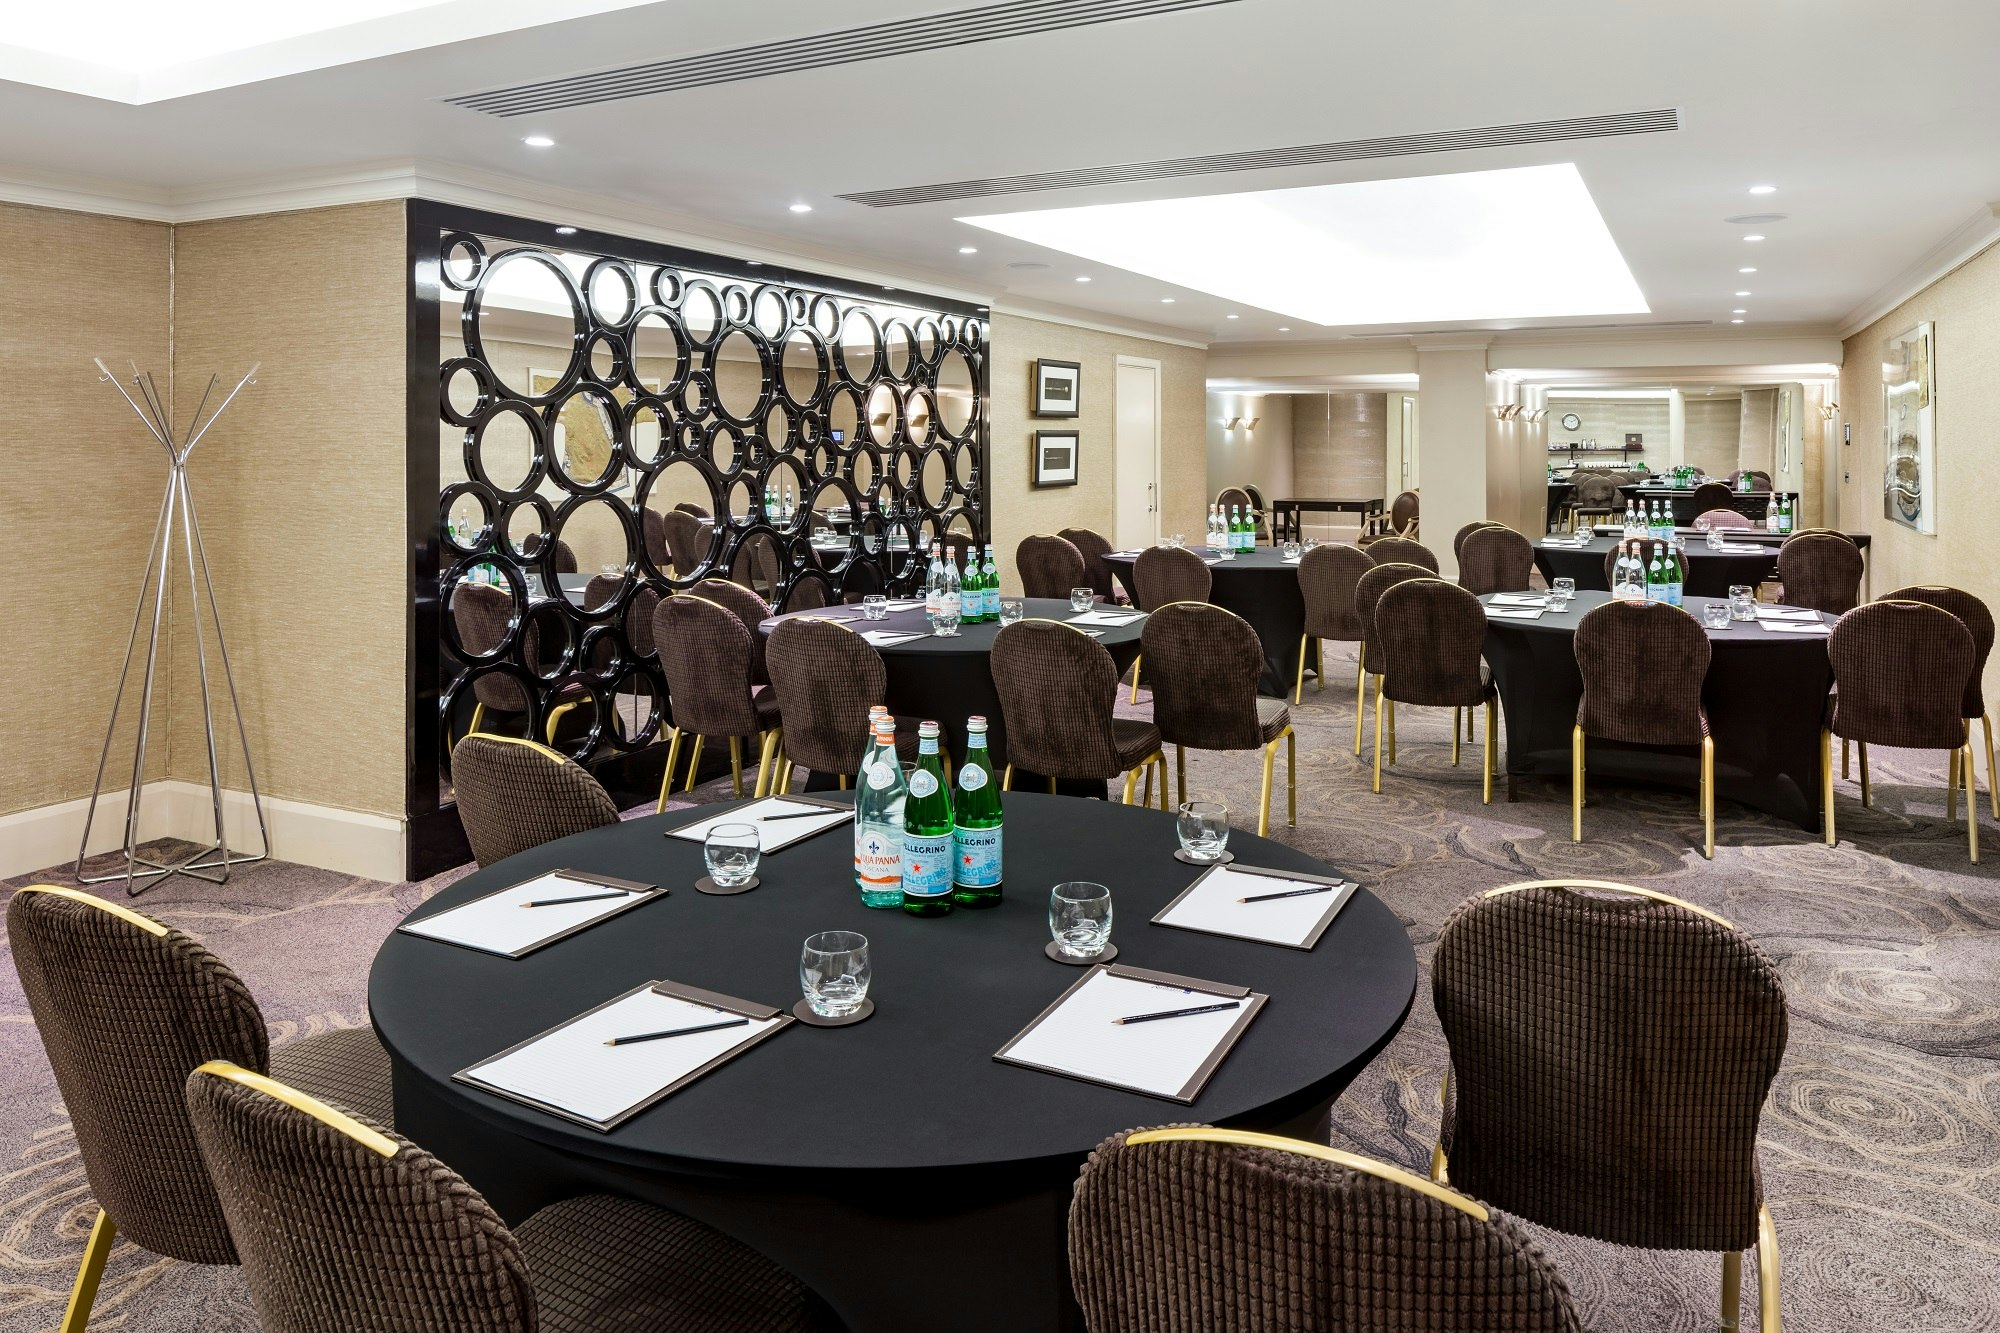 Private Dining Rooms Venues in East London - Radisson Blu Edwardian Grafton 